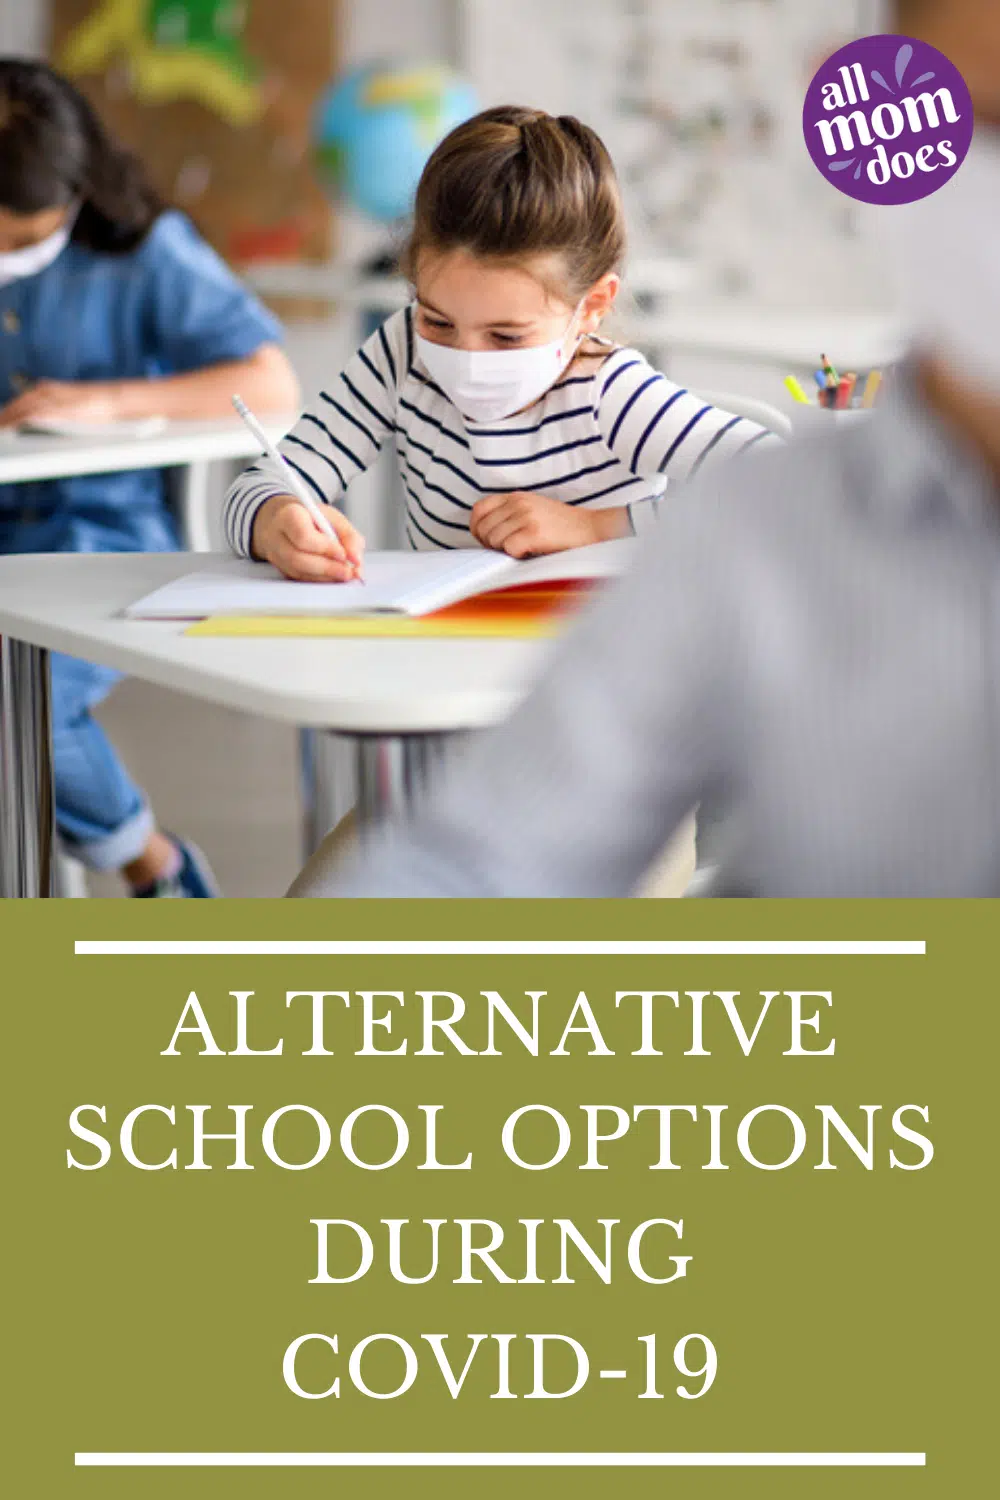 Homeschool and online school options. Alternatives to public school during school closures from COVID-19.